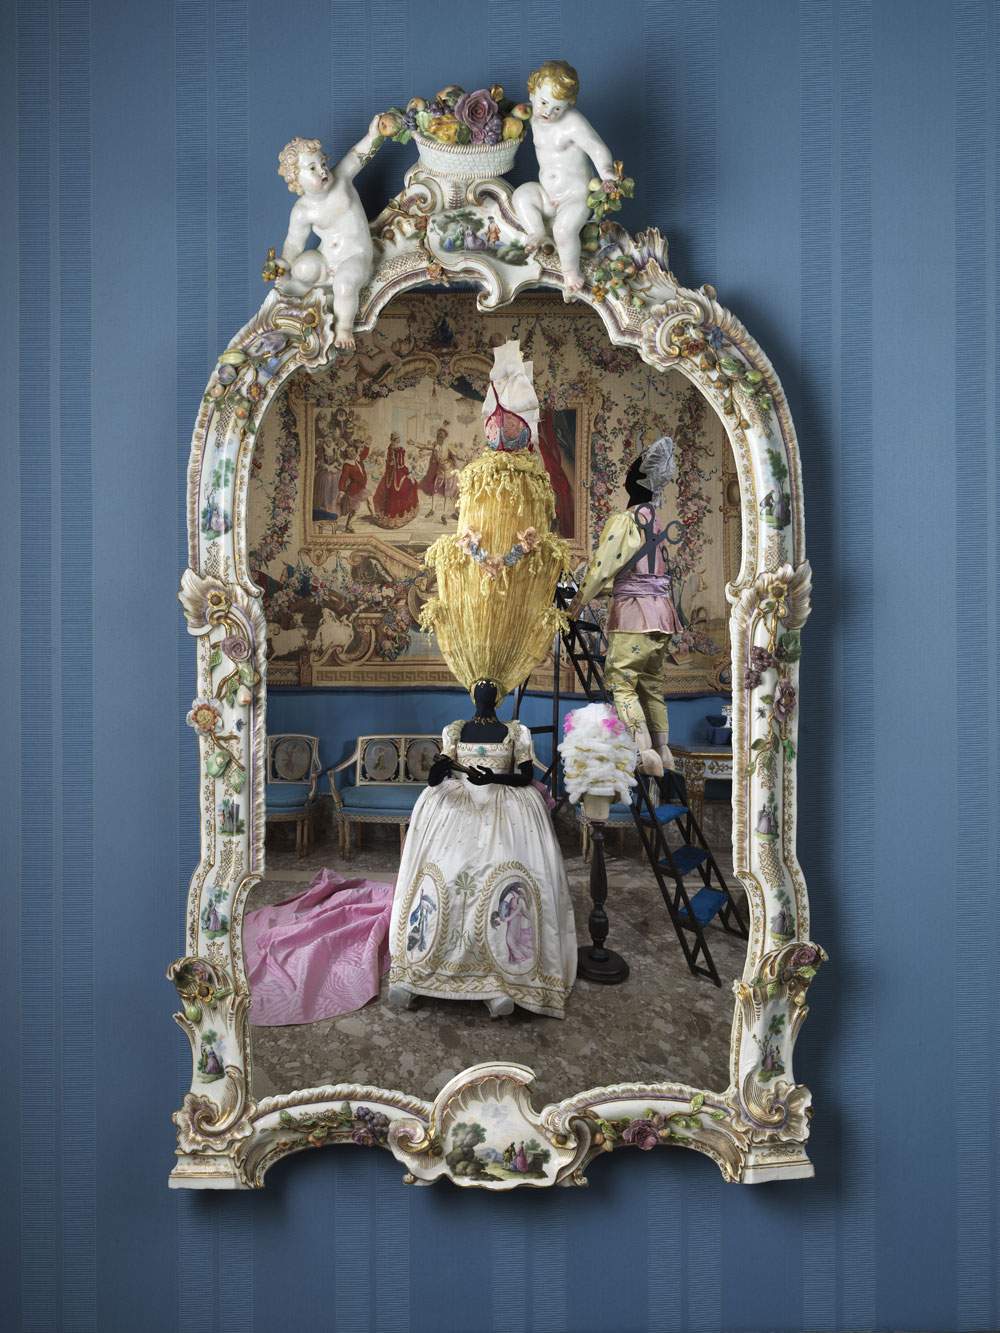 A journey into the theatrical and daily life of Naples at Capodimonte